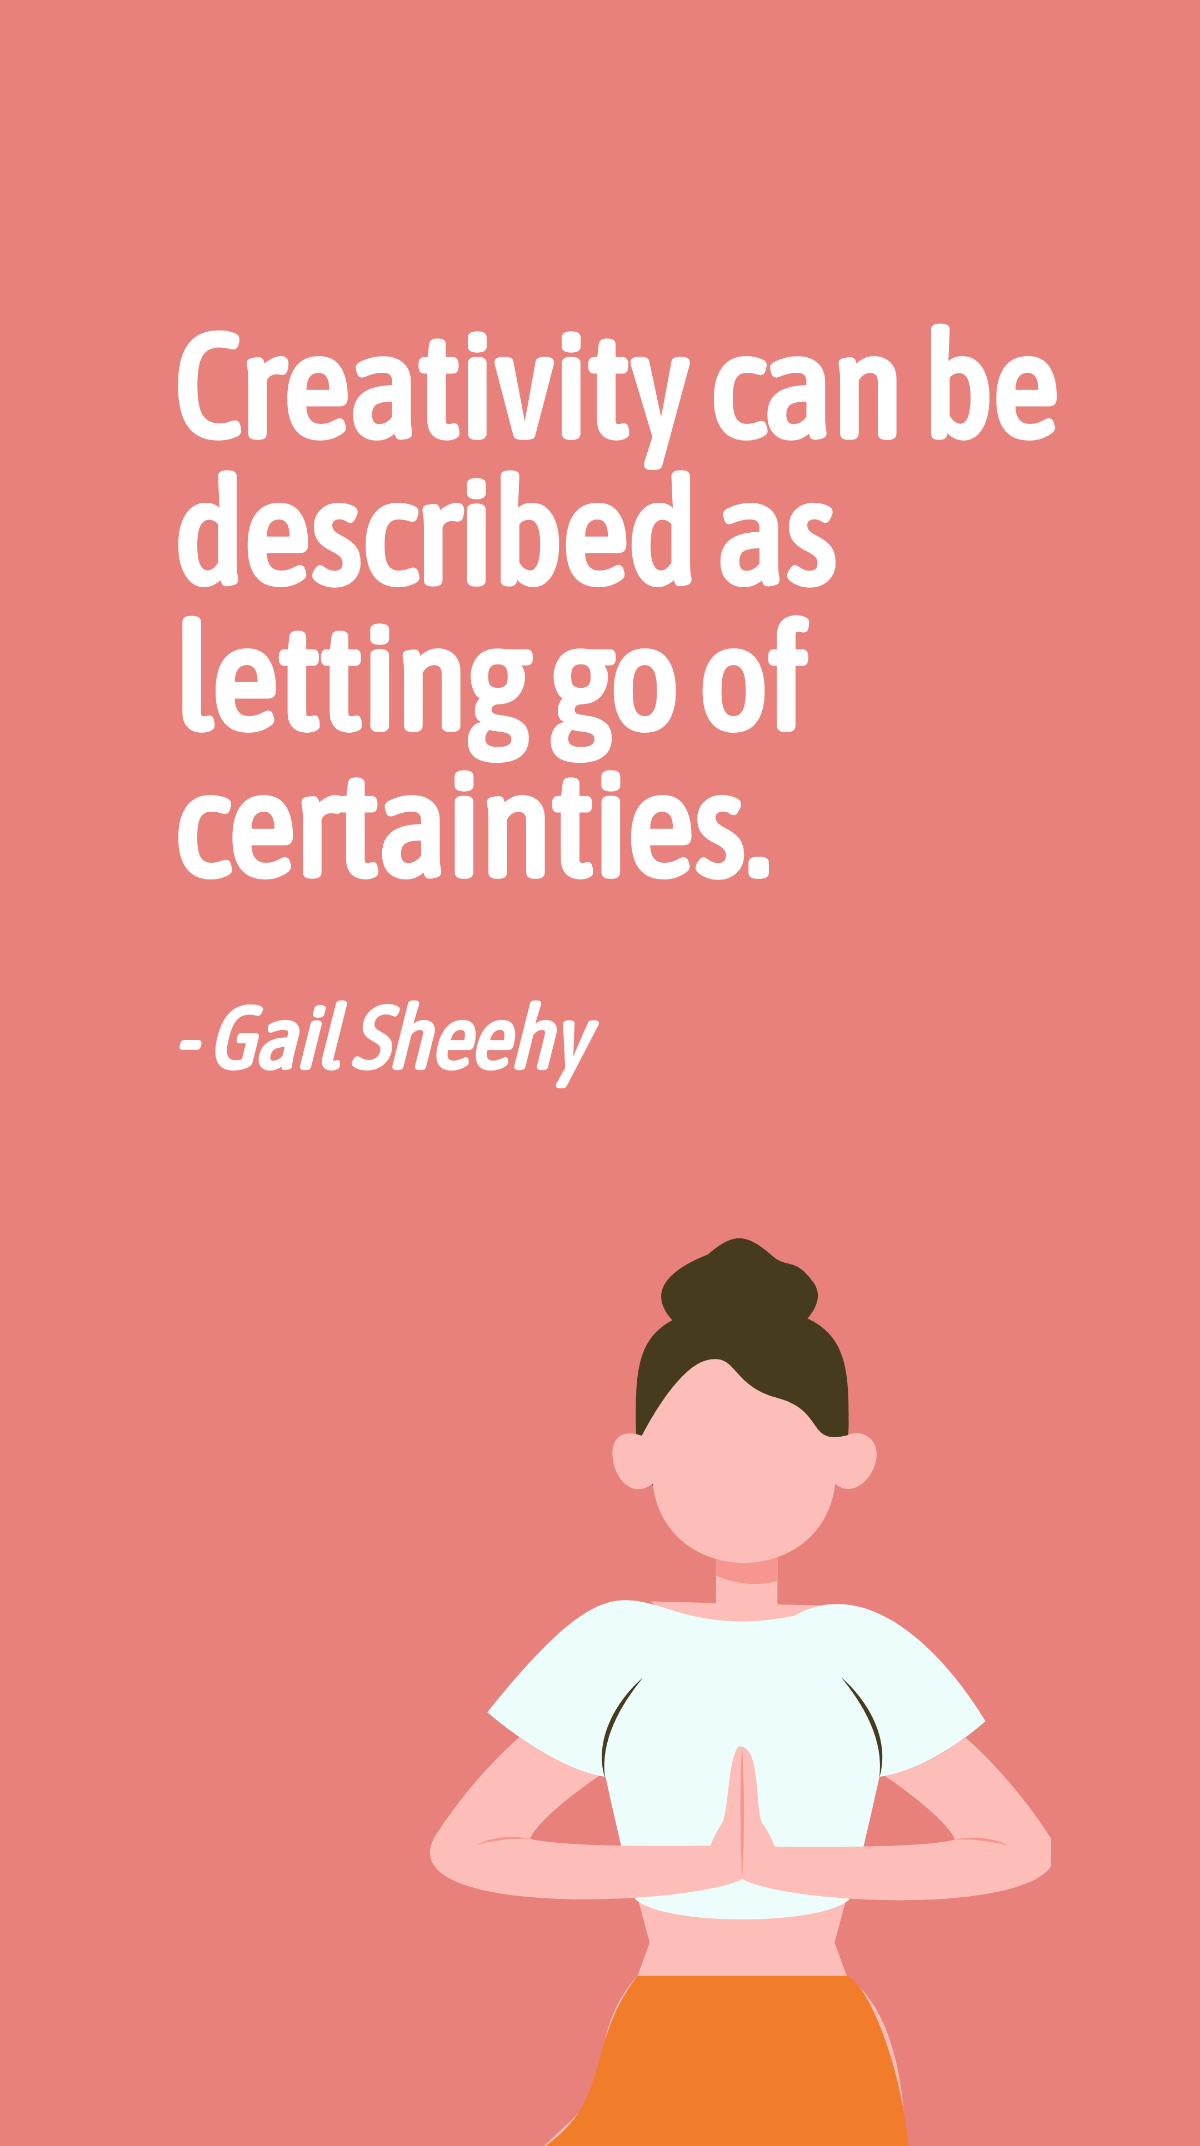 Gail Sheehy - Creativity can be described as letting go of certainties. Template